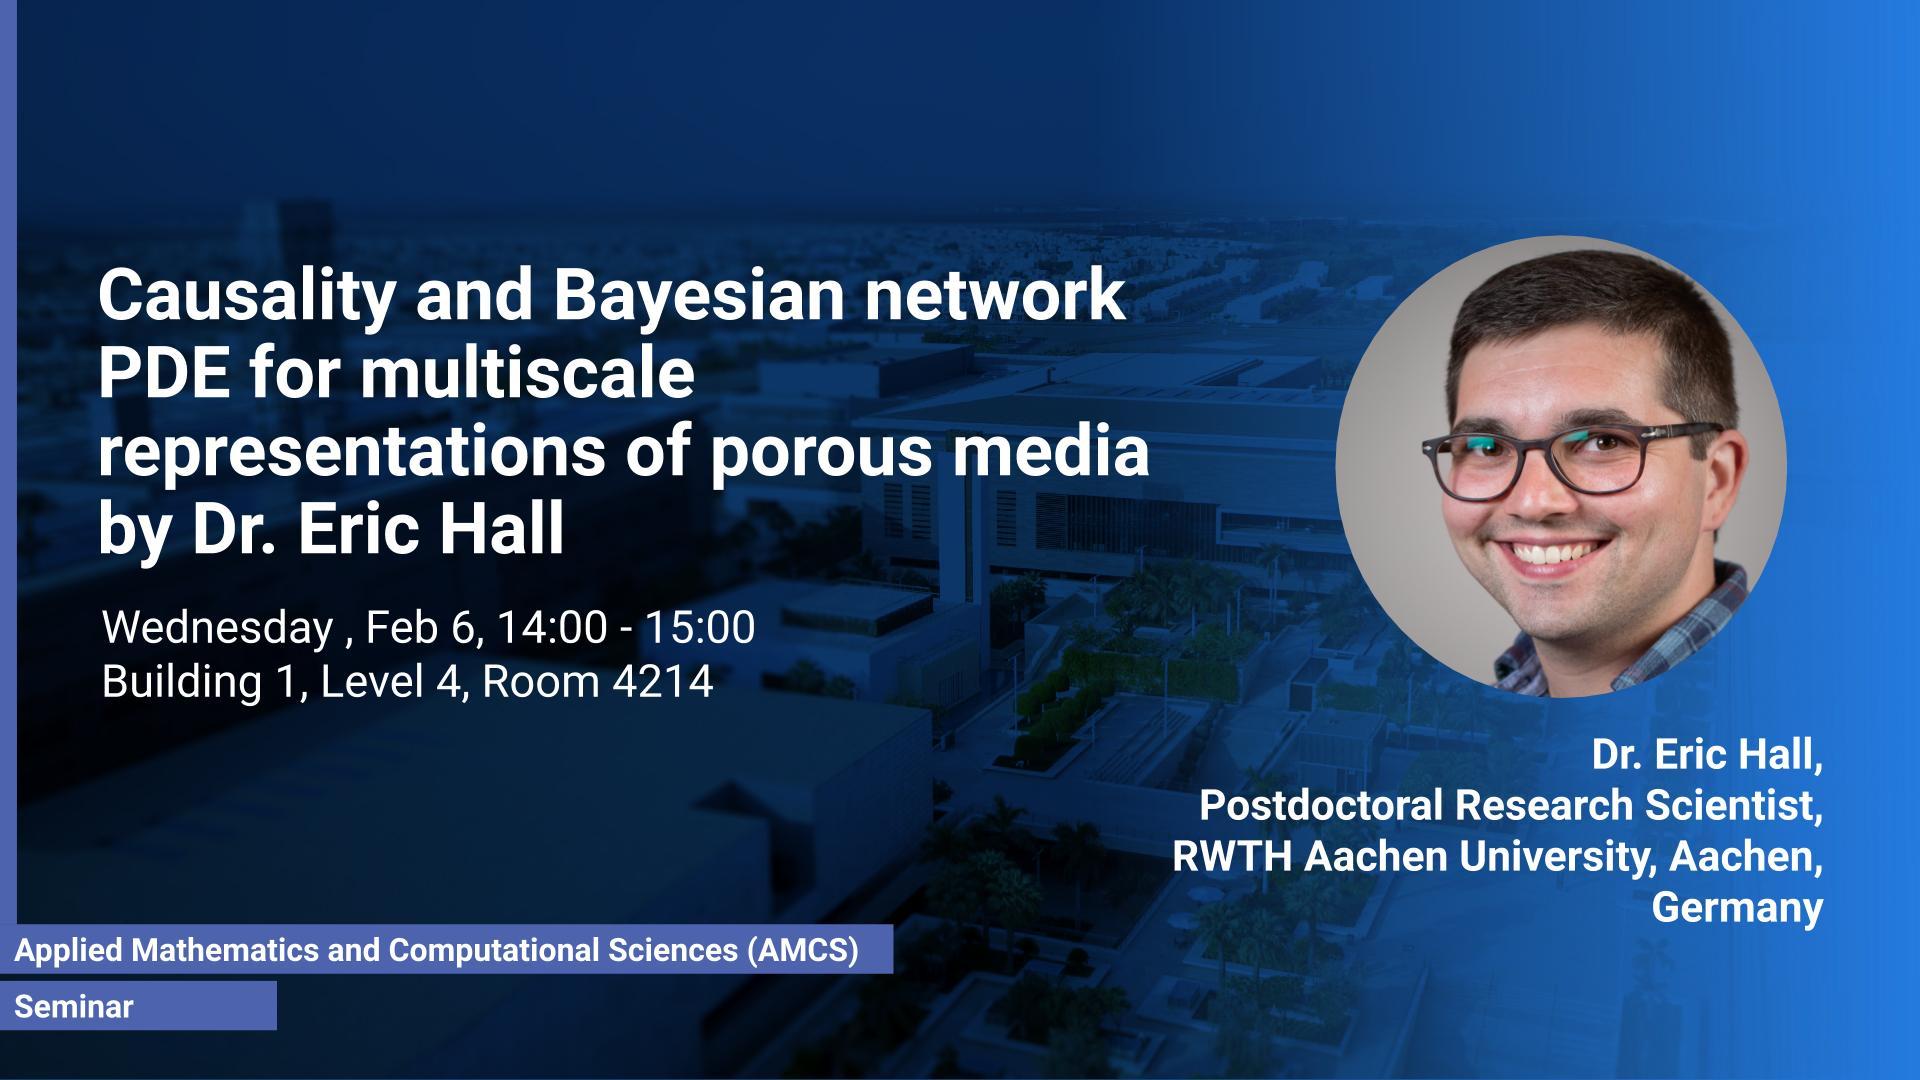 KAUST CEMSE AMCS STOCHNUM Seminar Eric Hall Causality And Bayesian Network PDE